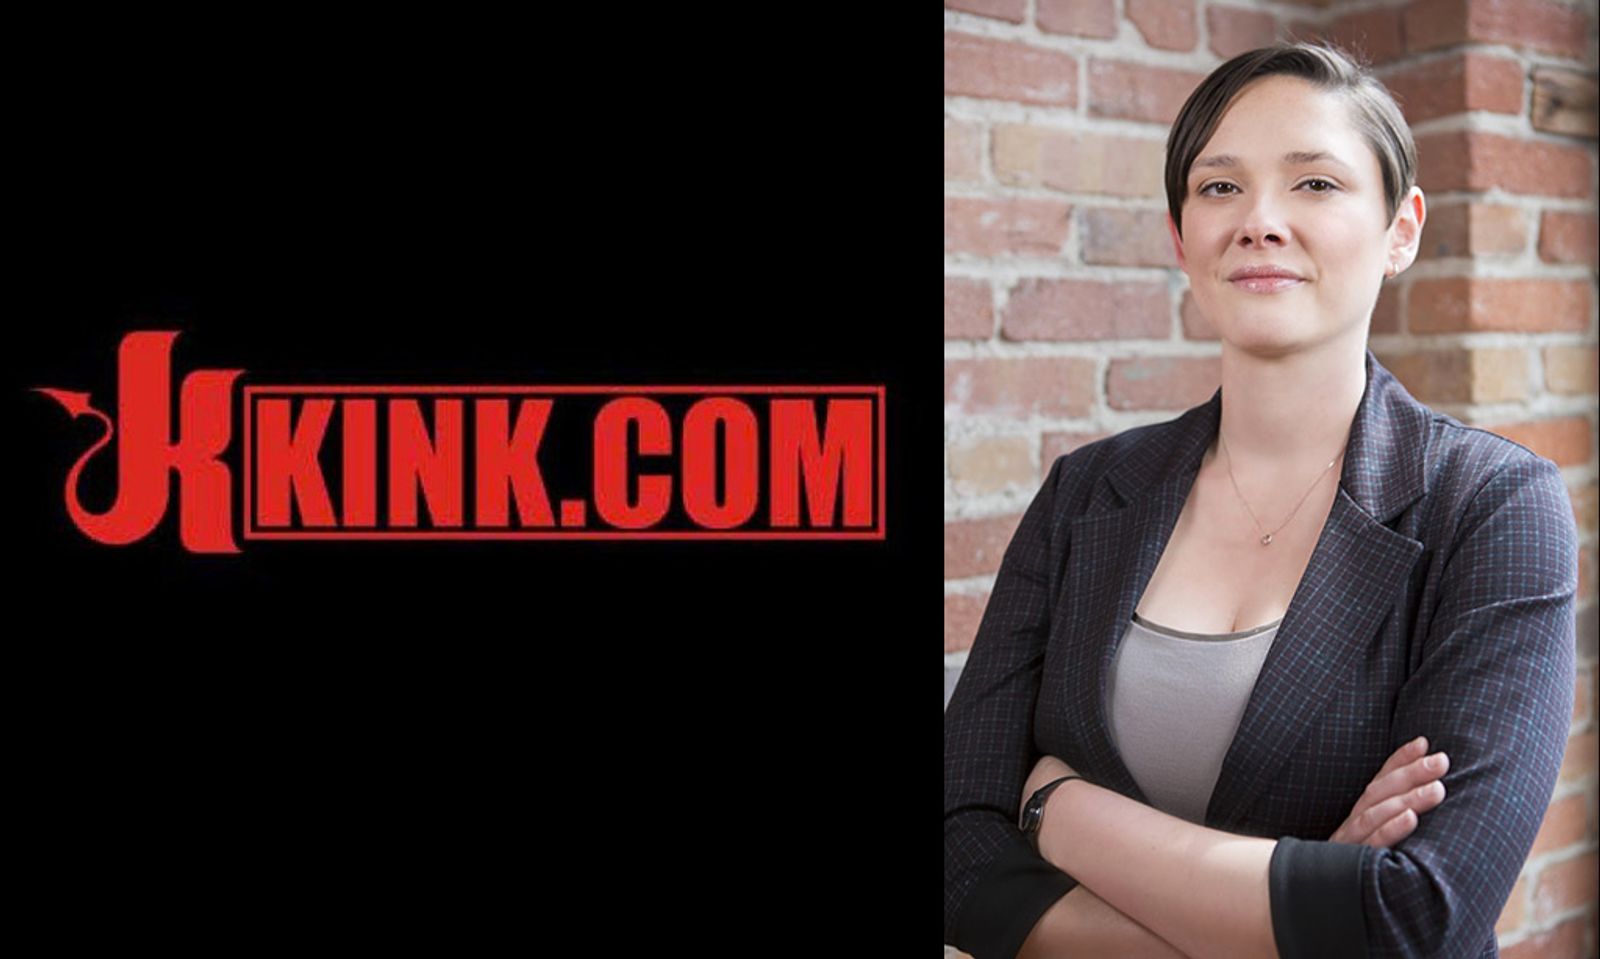 Alison Boden Named CEO of Kink.com, Cybernet Entertainment